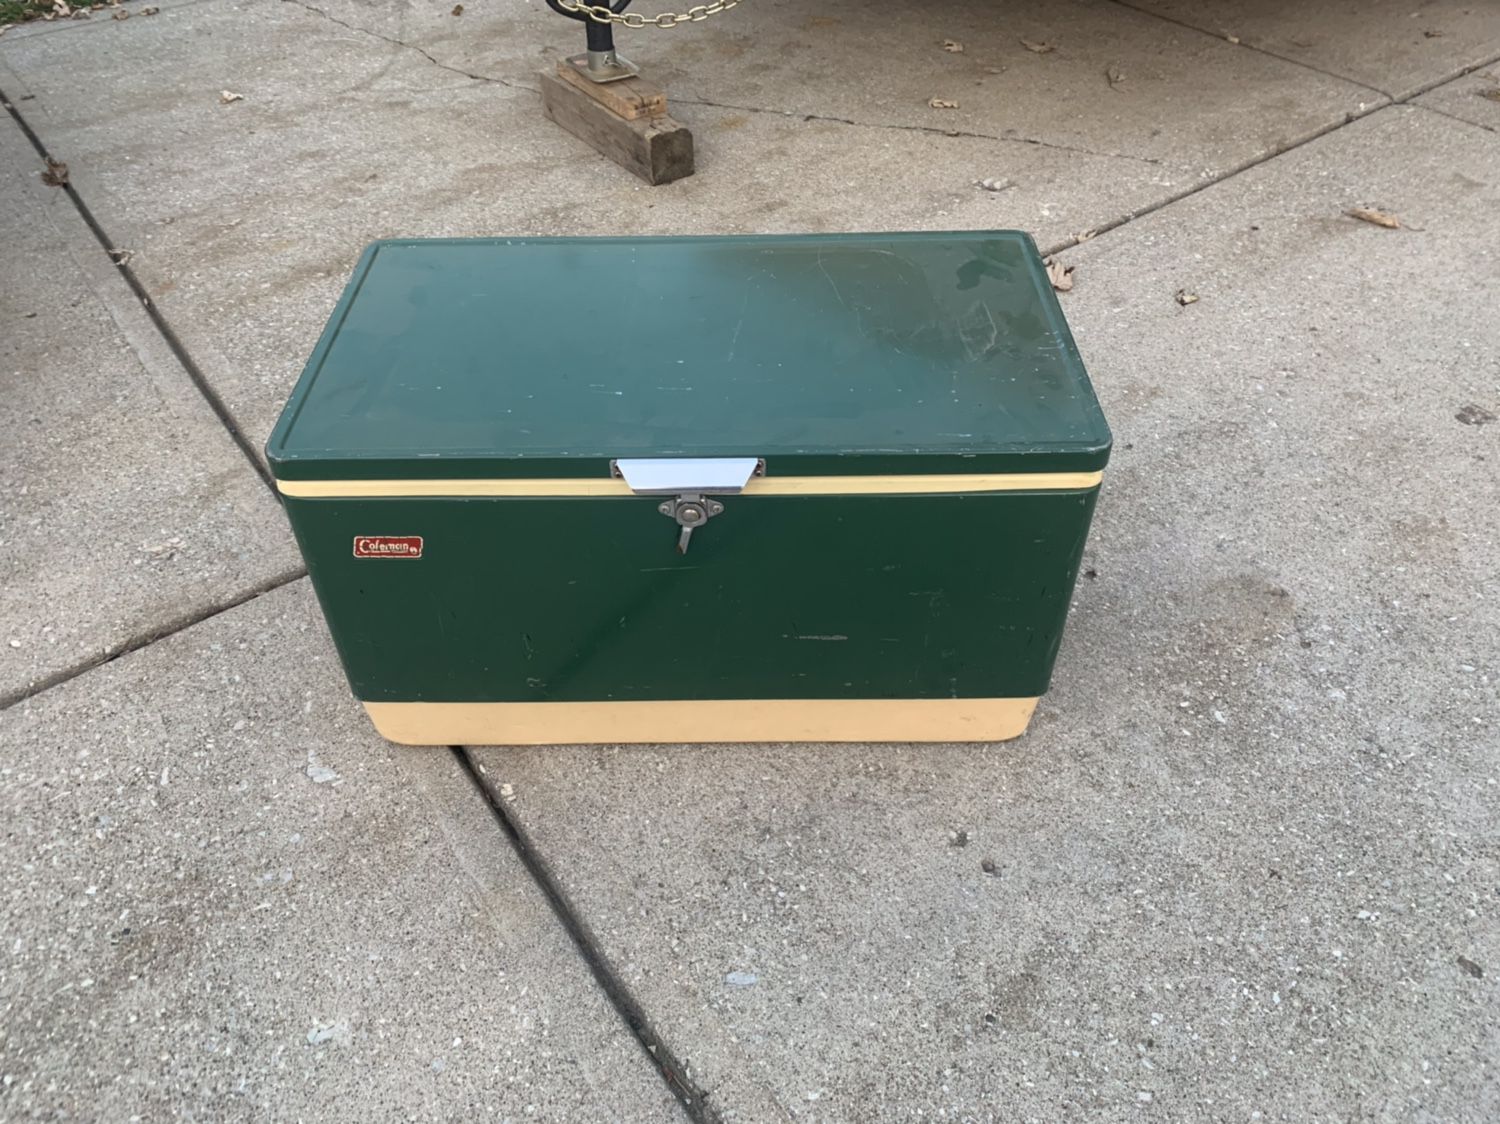 Vintage metal Coleman cooler with one insert in good condition